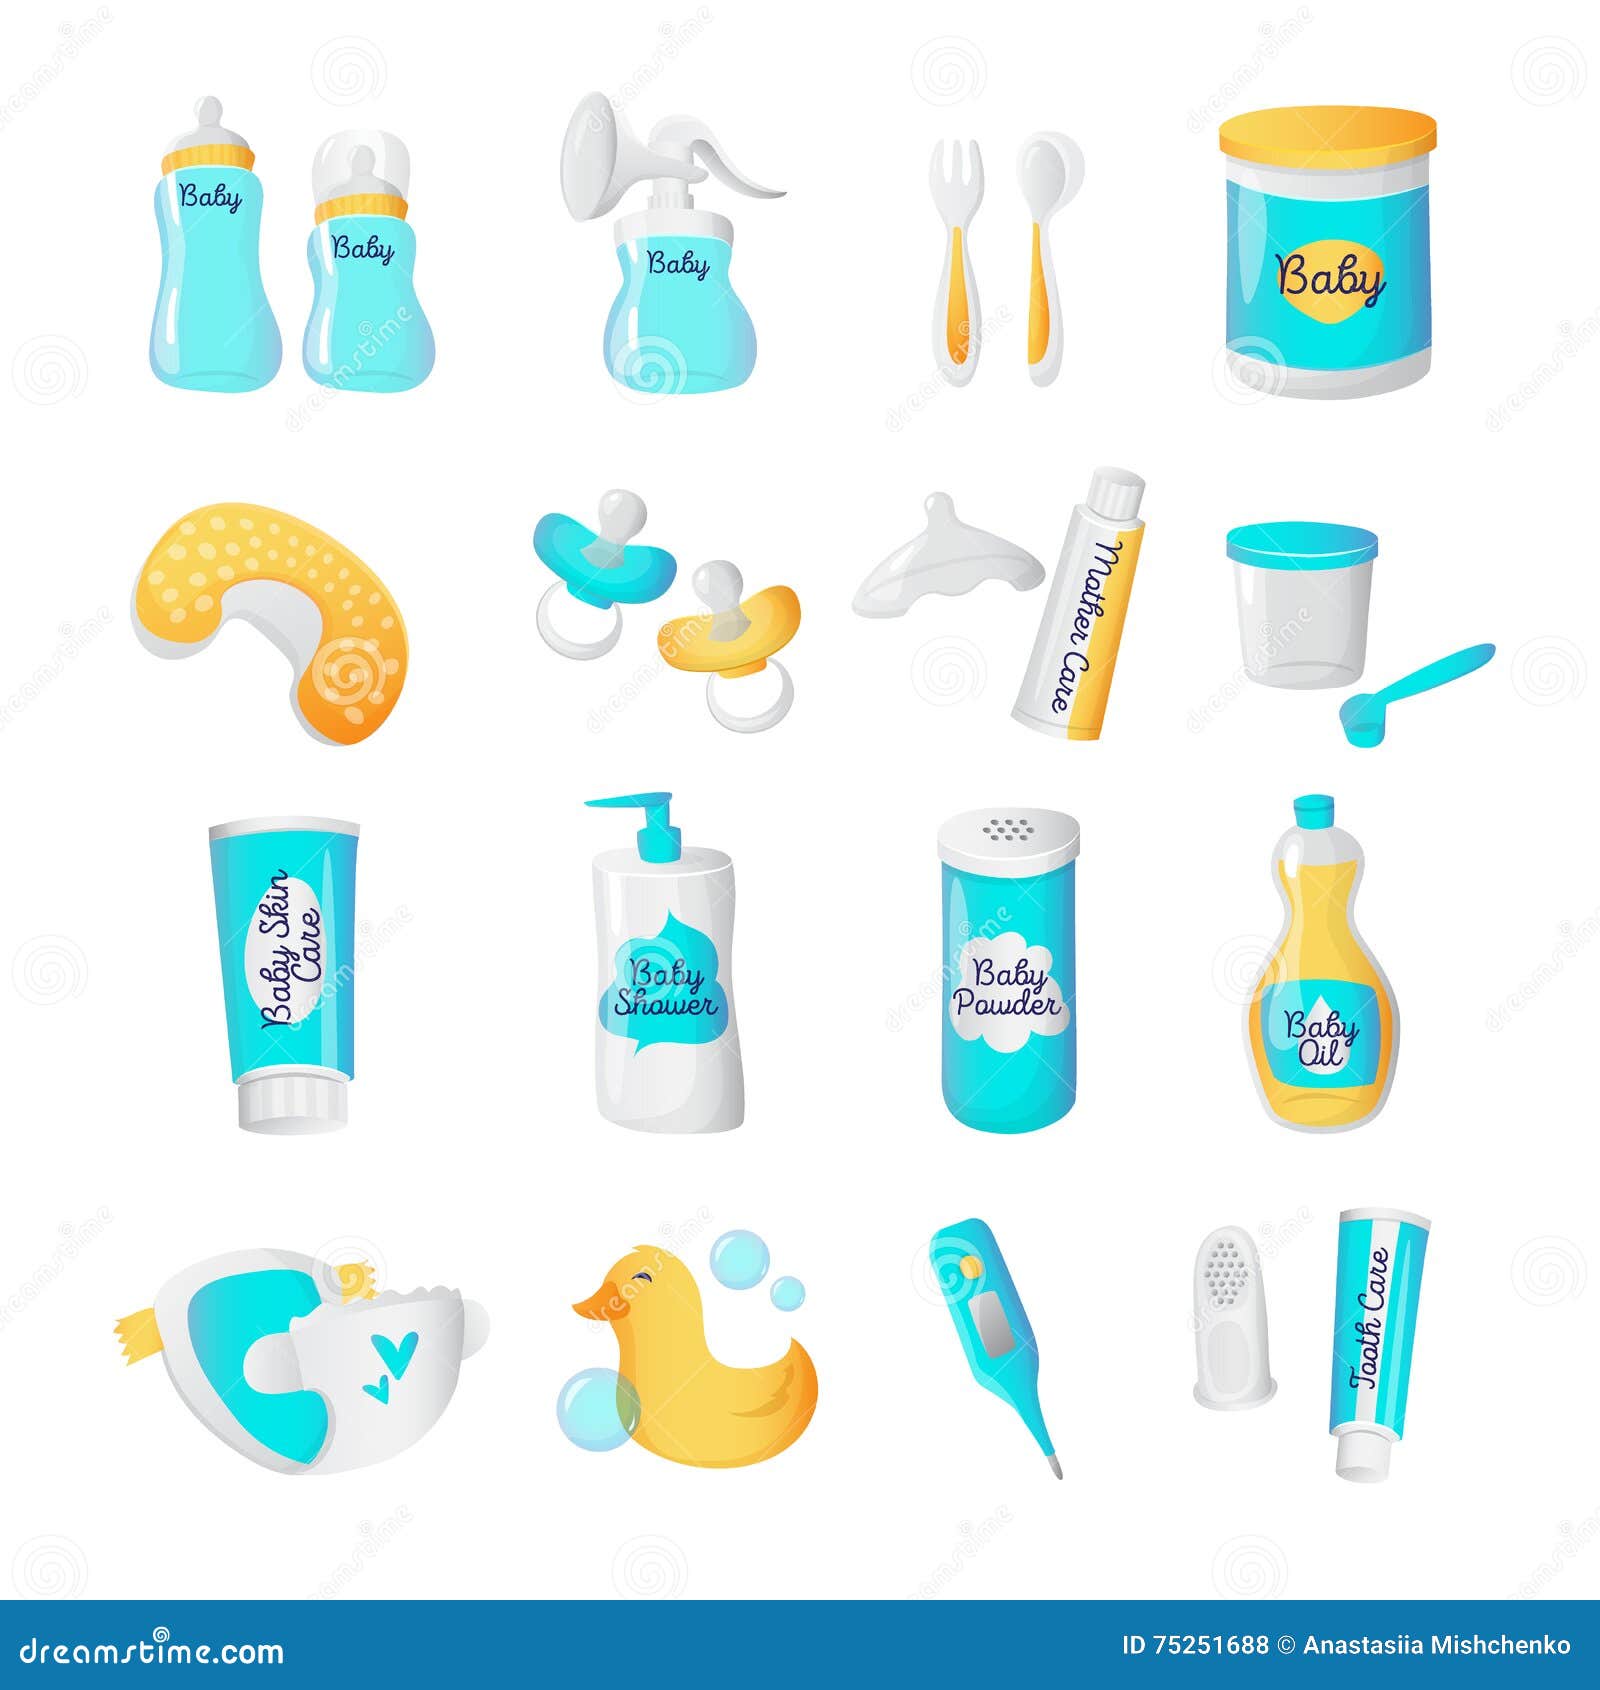  baby accessories icons. cartoon style newborn objects set.